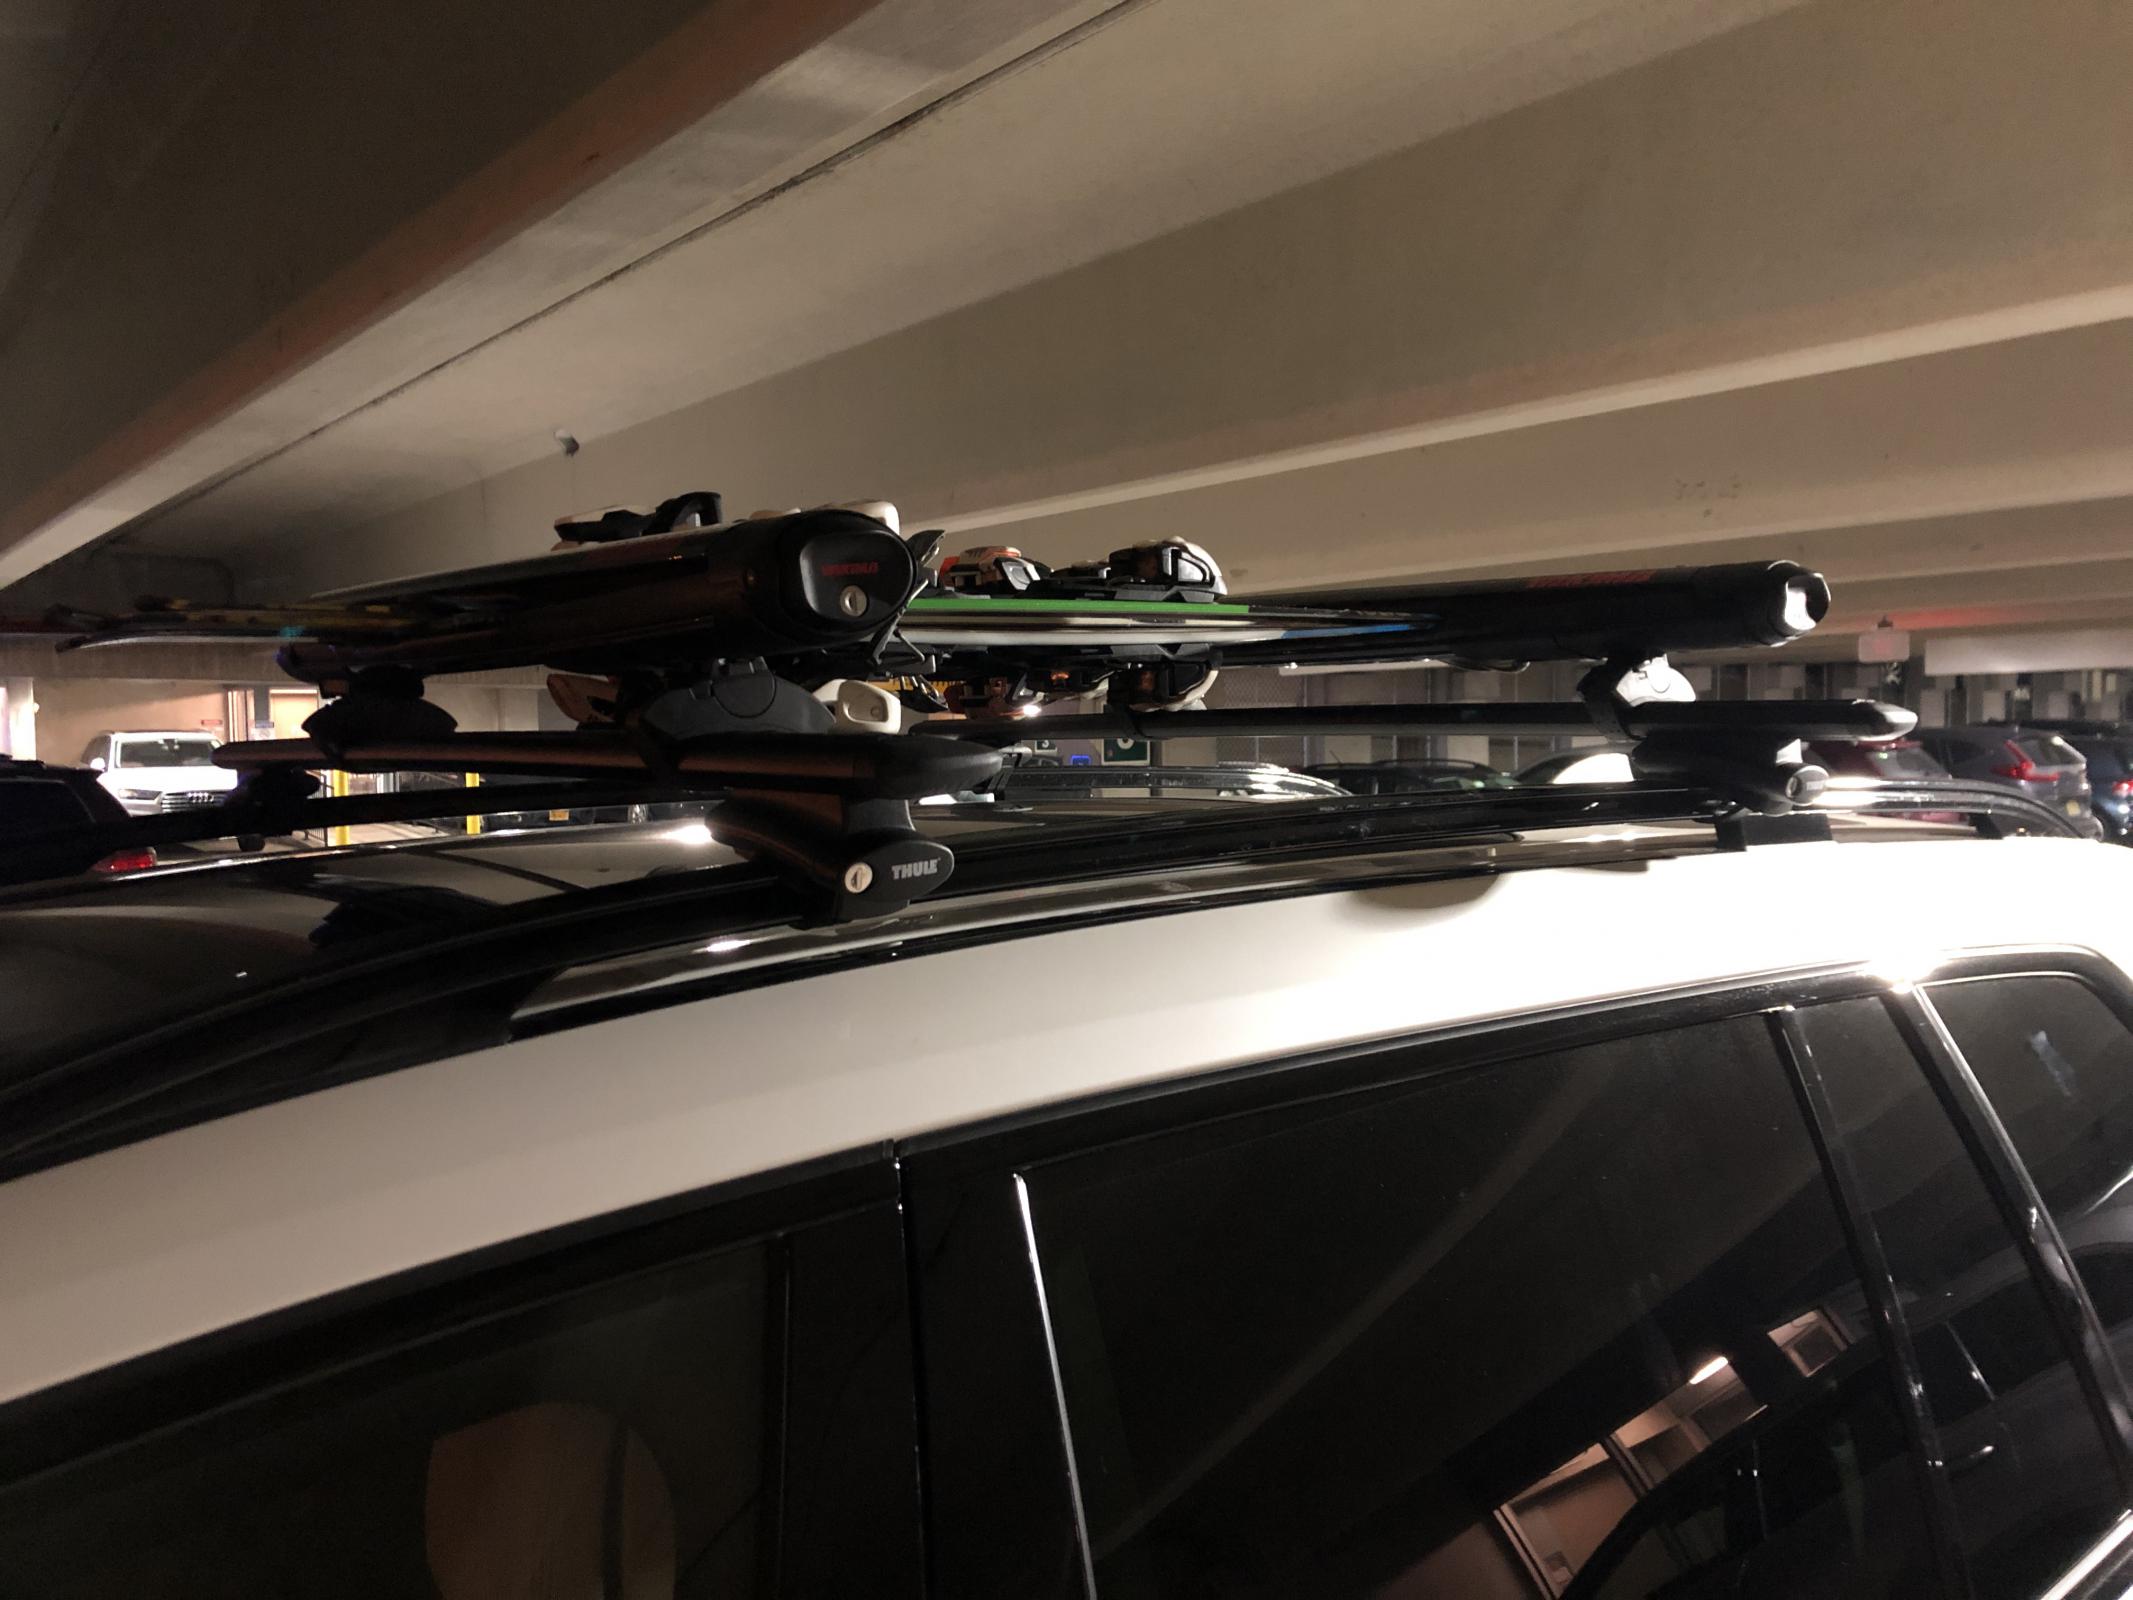 Question For Those With M-Sport Pkg and Roof Rack System